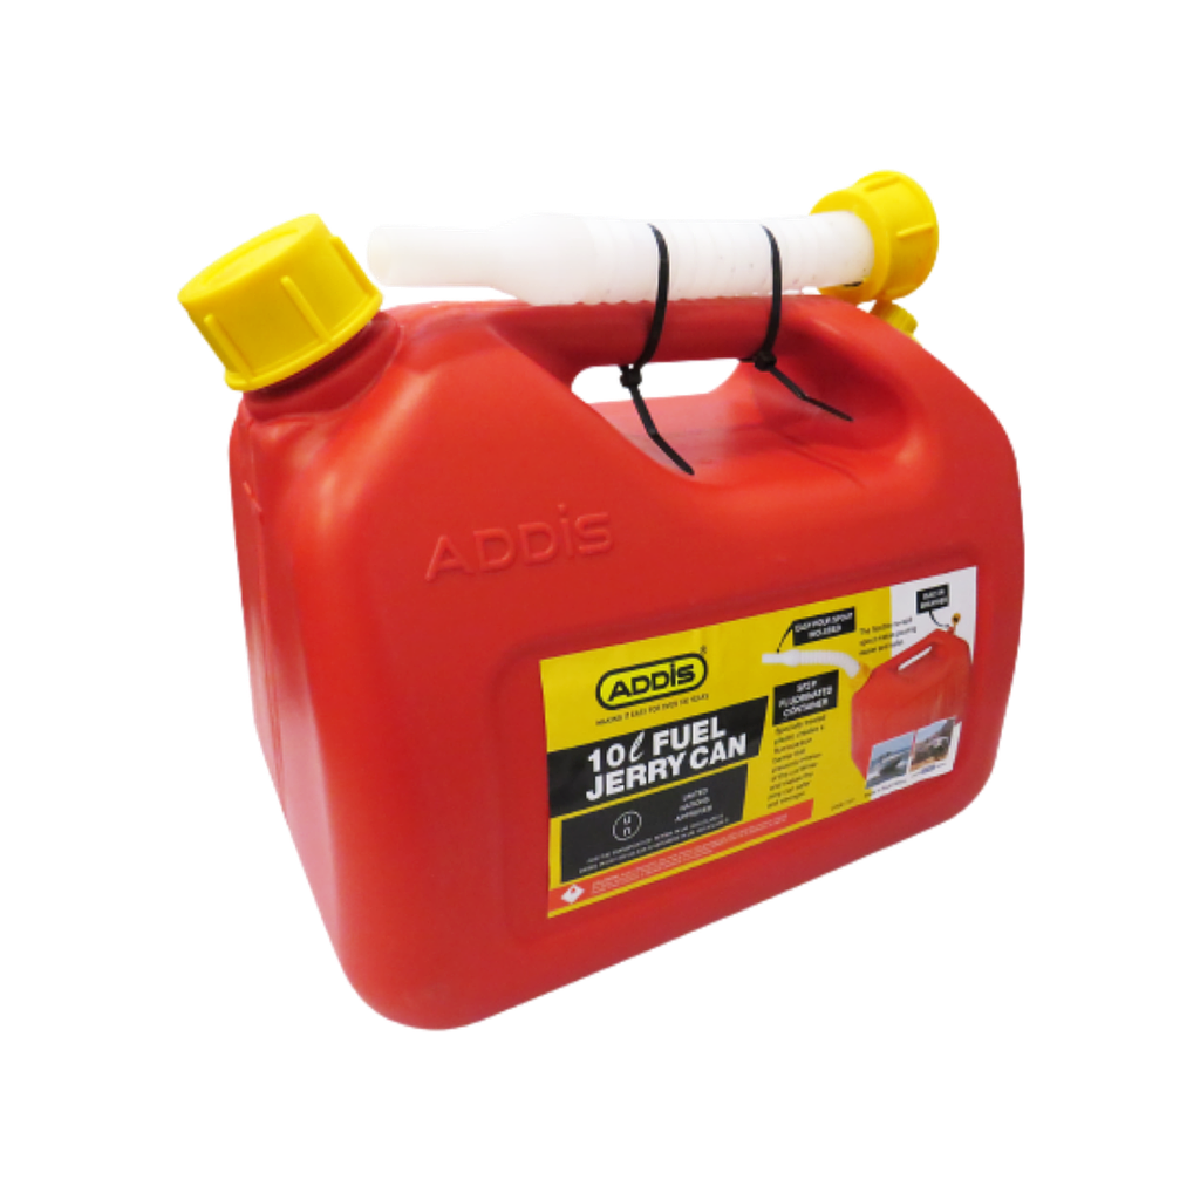 Addis Fuel Jerry Can 10lt